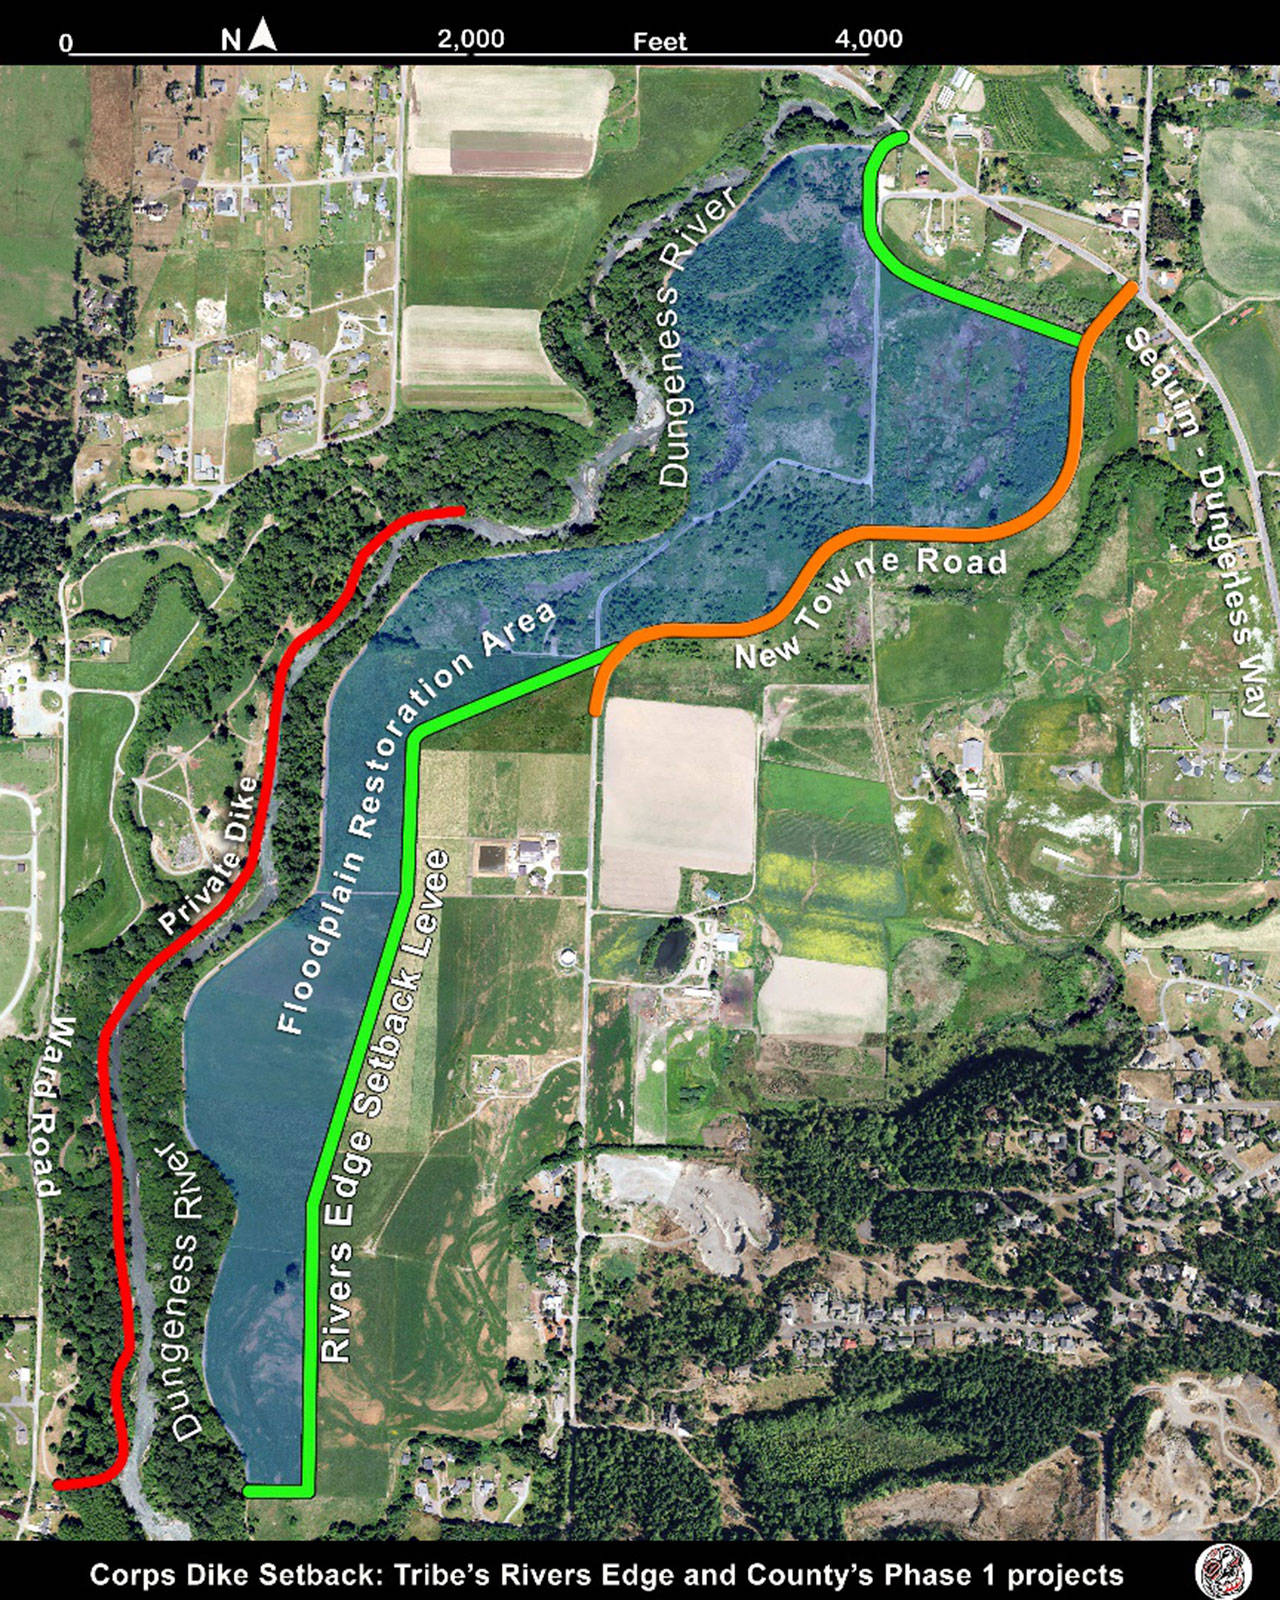 A schematic details the Rivers Edge setback levee, construction of which is in progress and expected to finish in September. (Map courtesy of Jamestown S’Klallam Tribe)